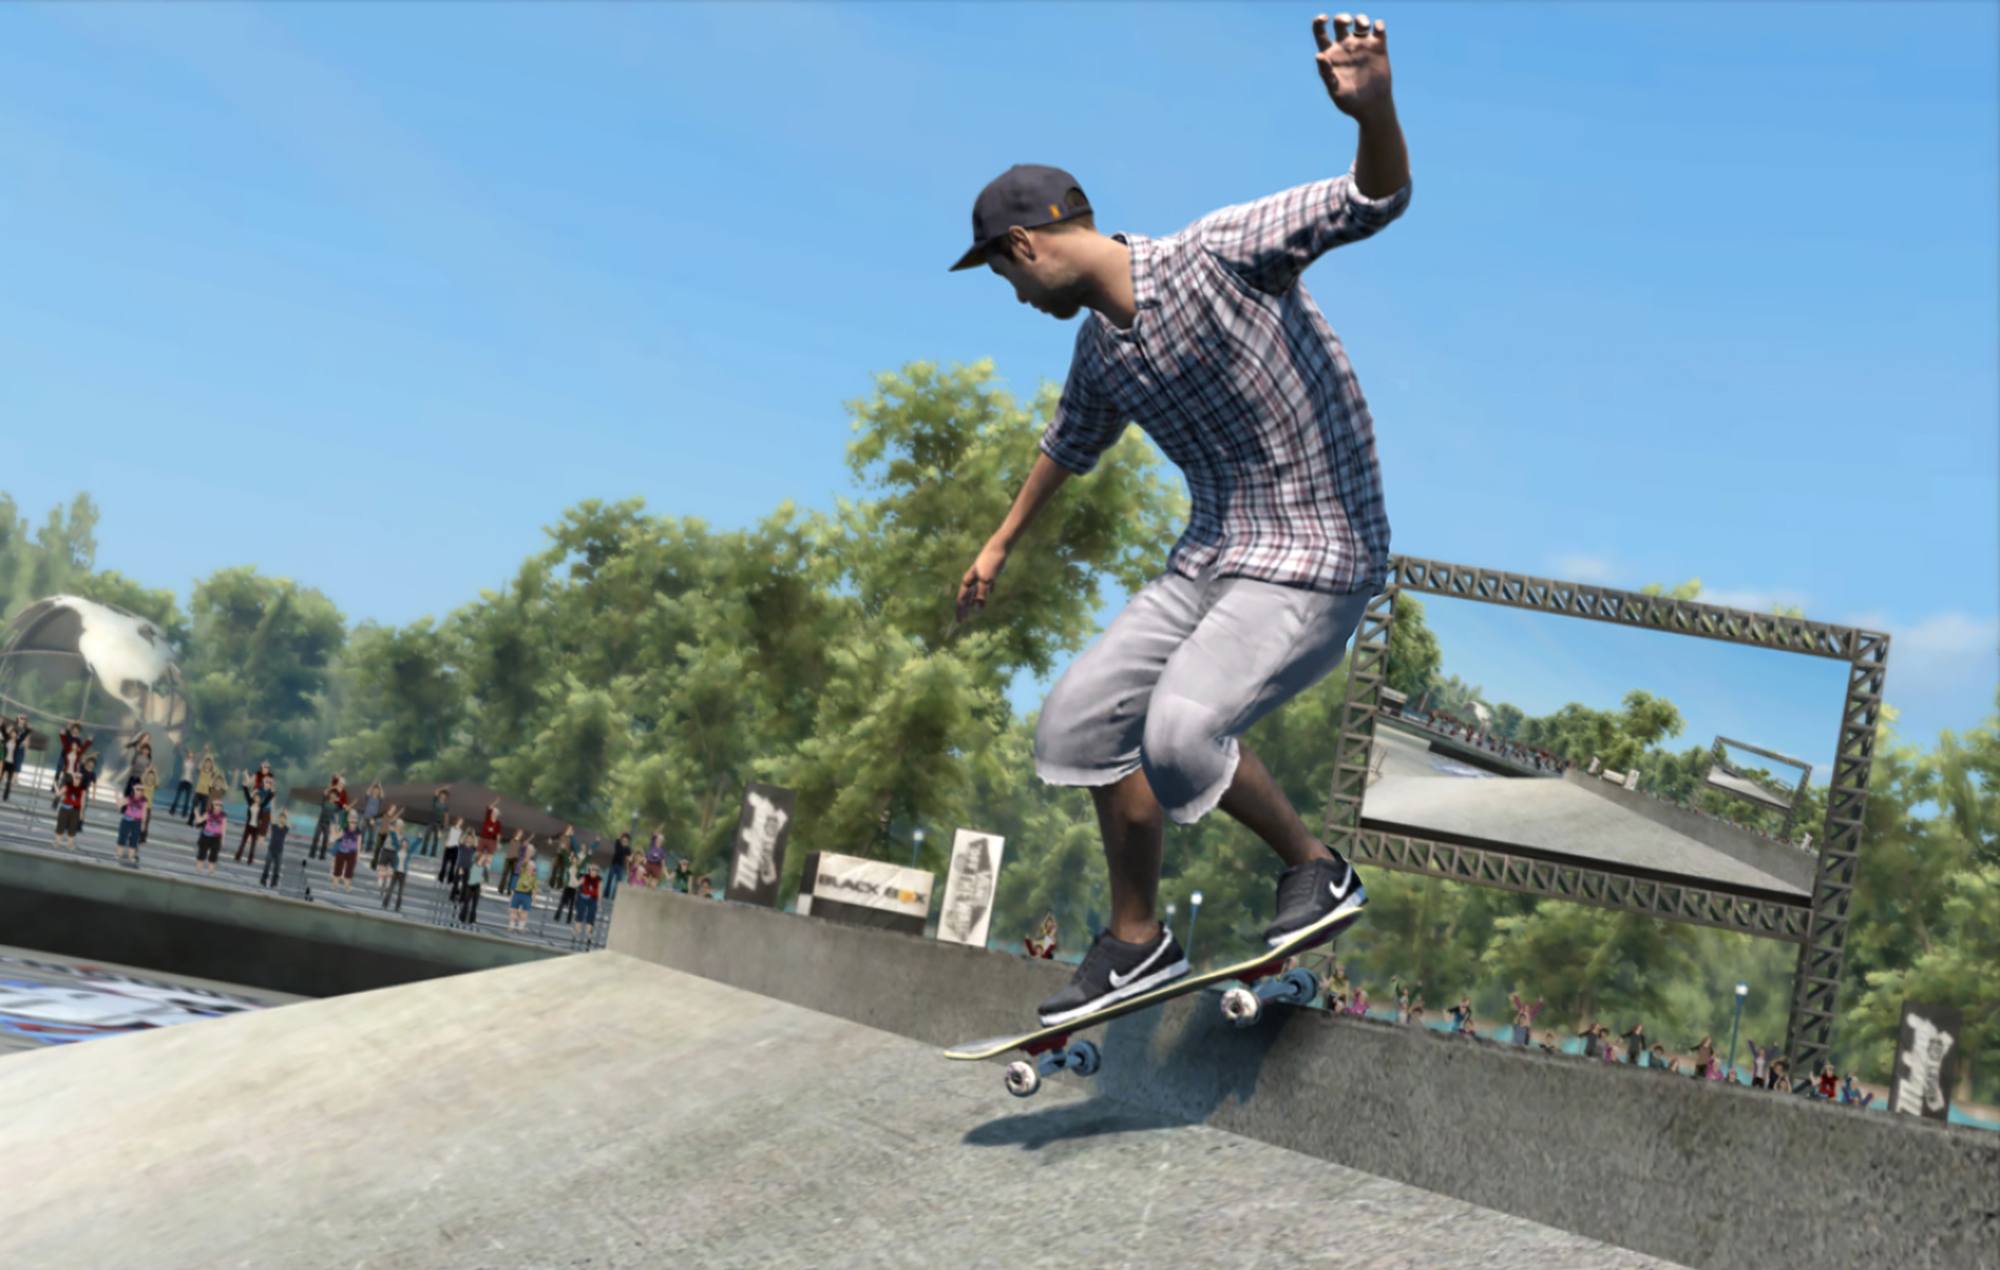 EA's Latest Skate Game to Arrive on Mobile Devices Along with PC and Console